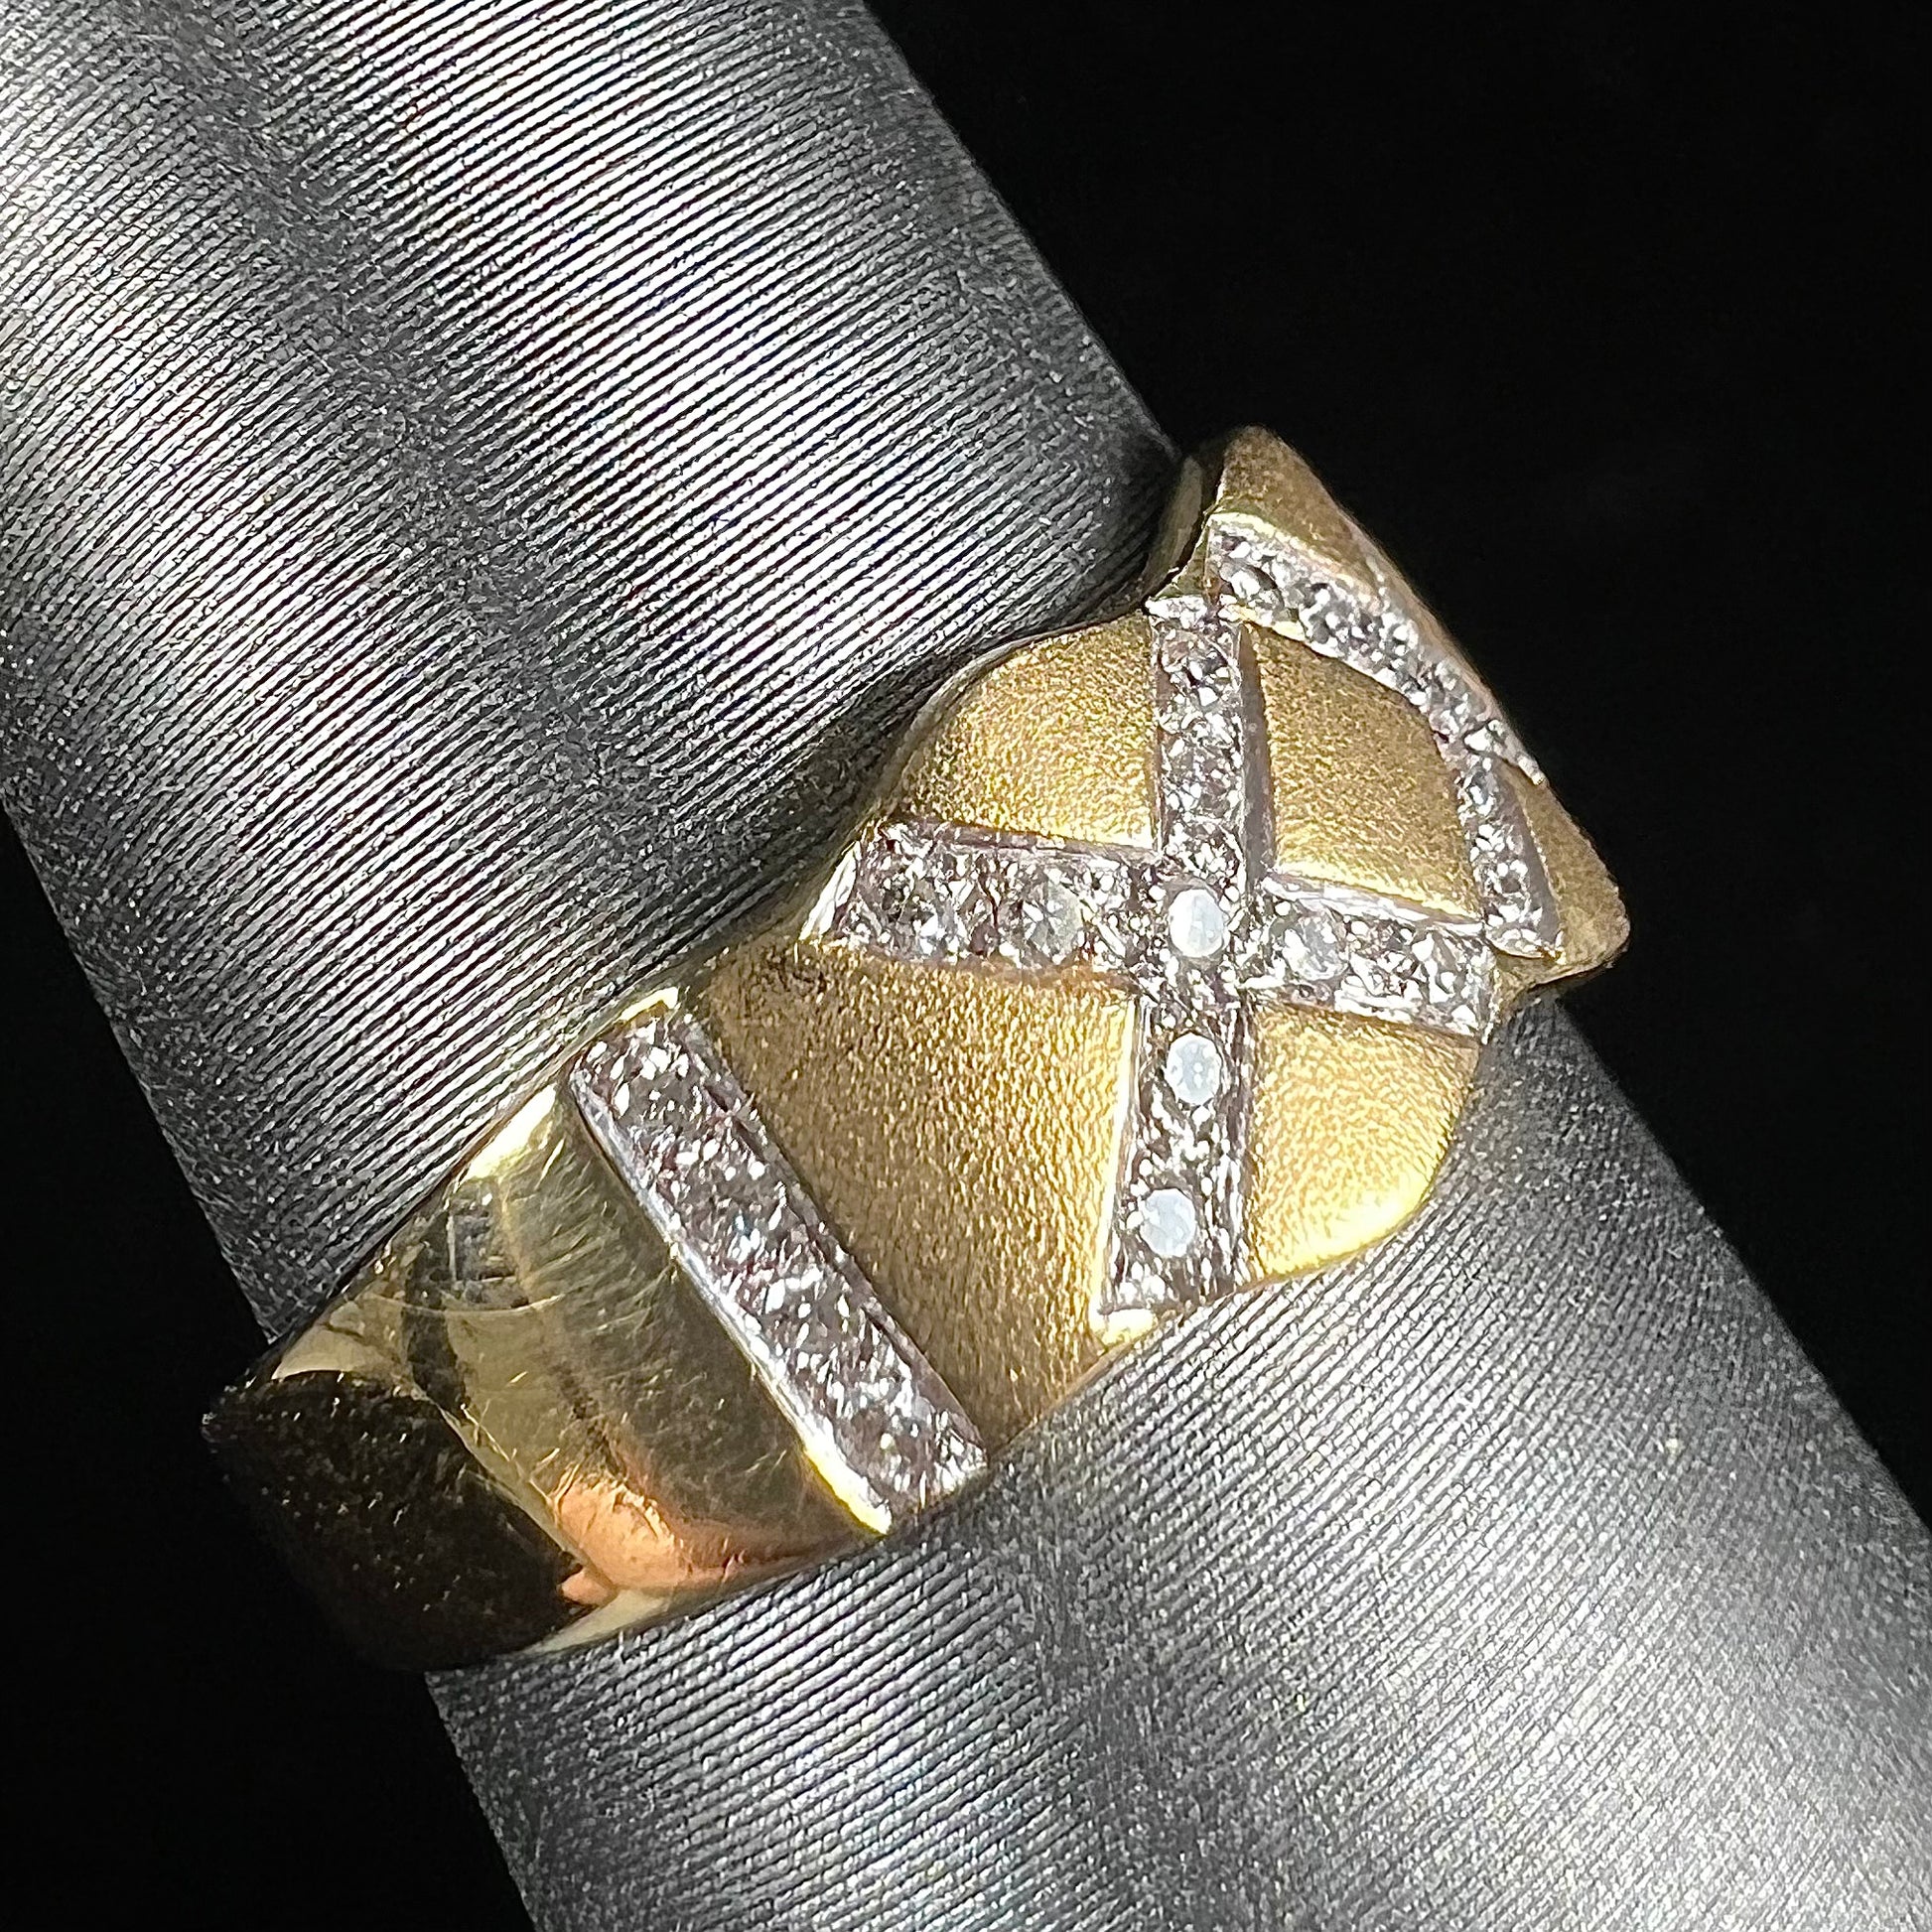 An 18kt yellow gold ring with three "X" shapes pave set with round diamonds.